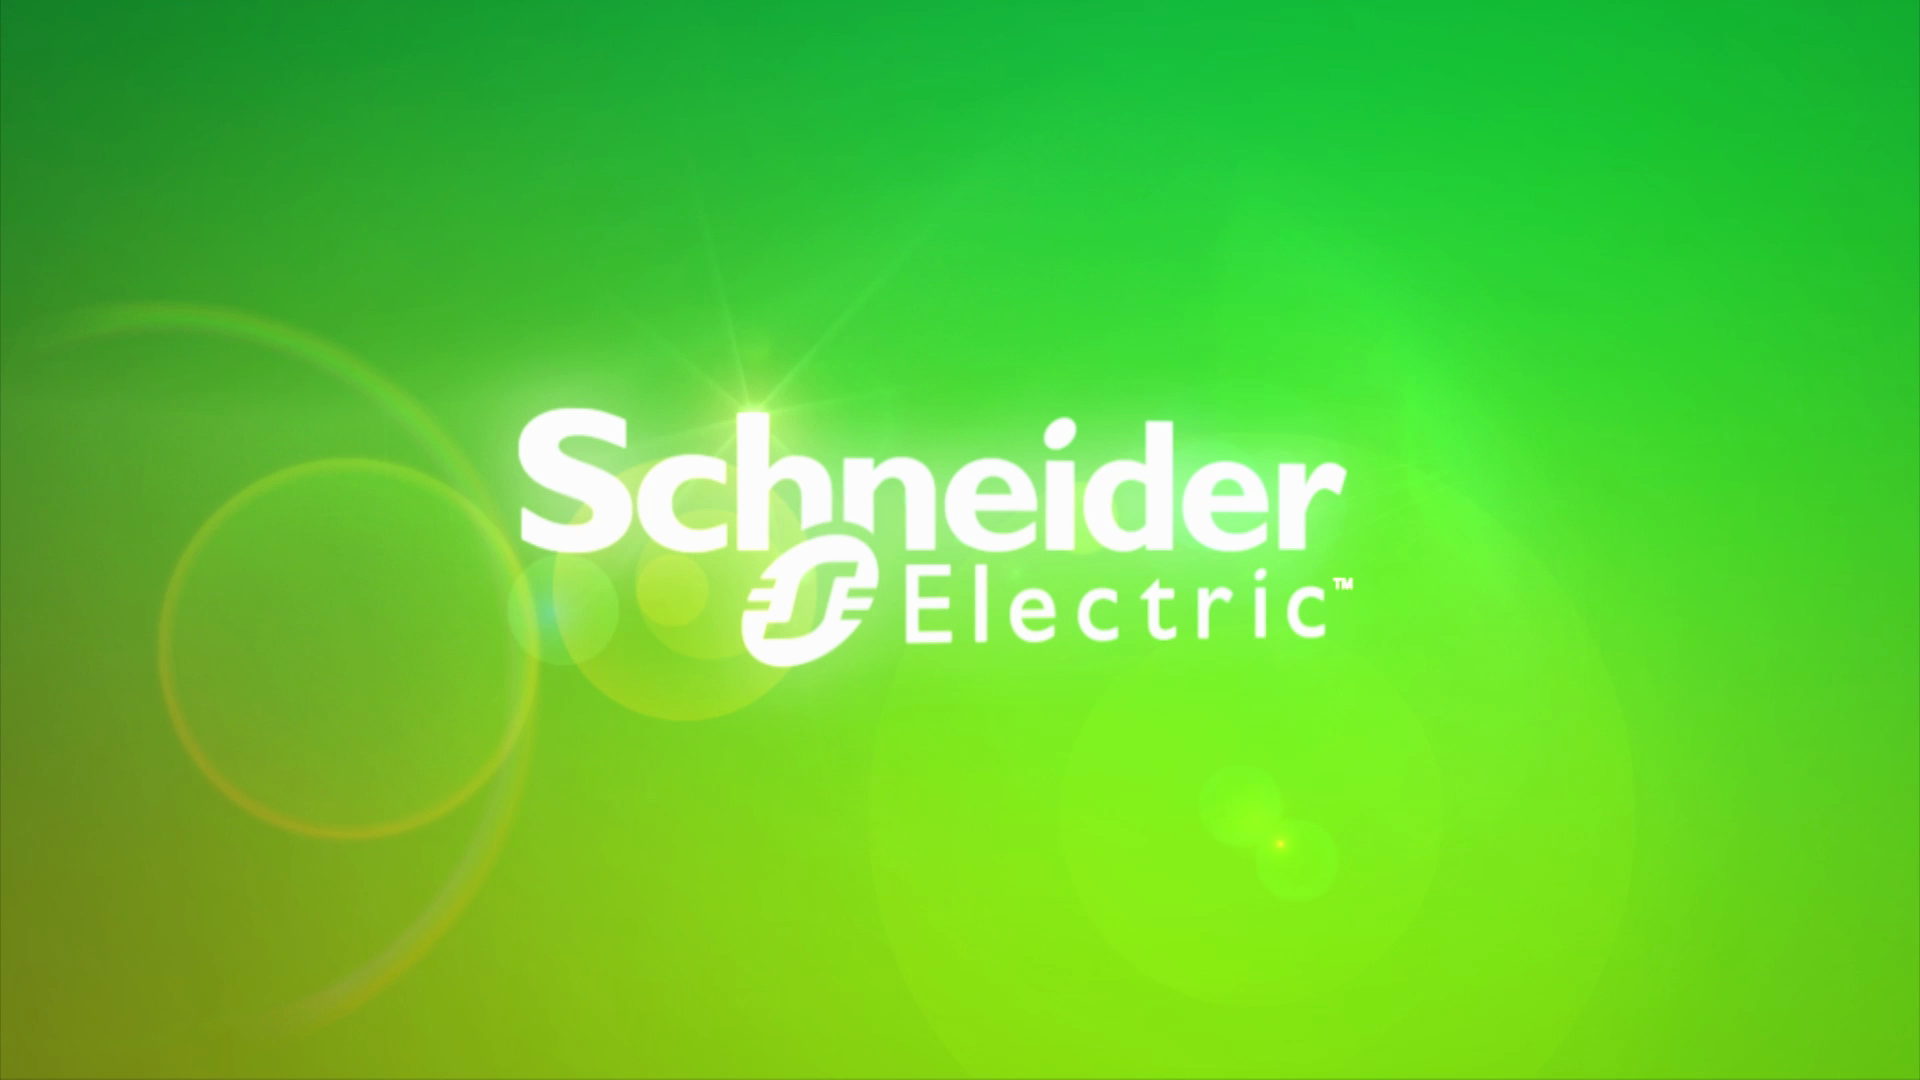 Energy sector update from Schneider Electric